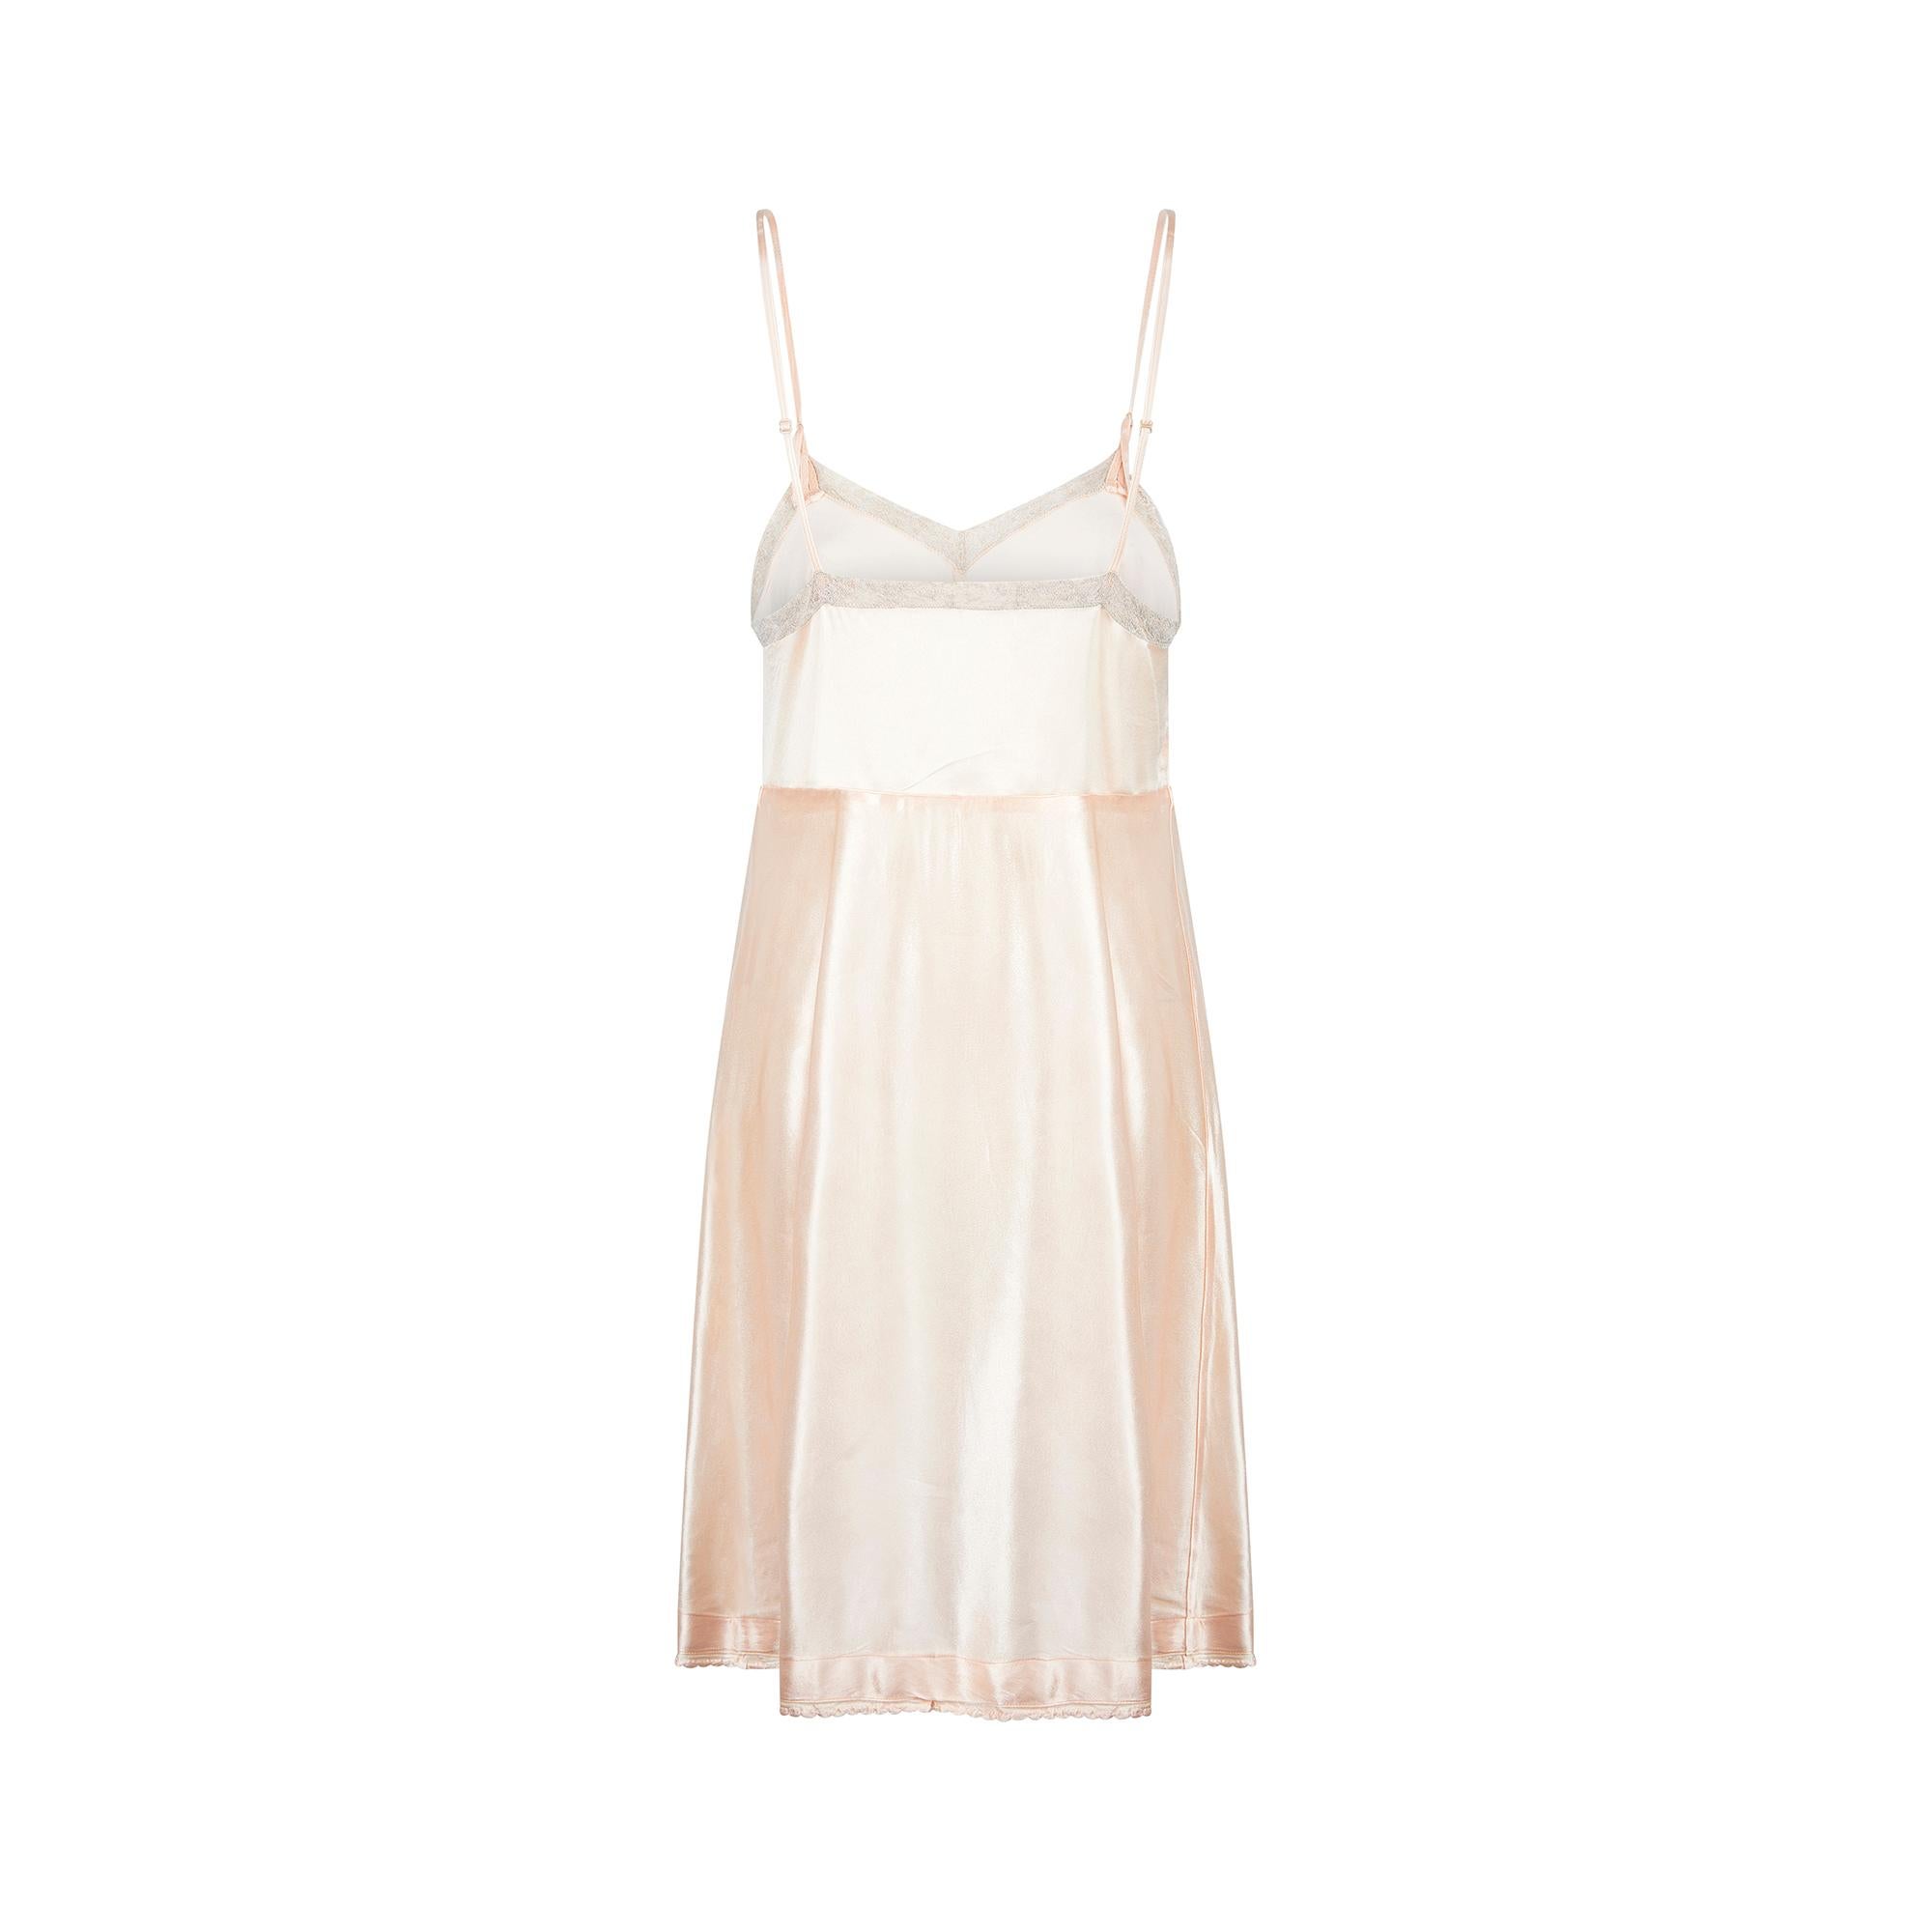 1930s Lace Trimmed Peach Slip Dress with Scalloped Hem In Excellent Condition For Sale In London, GB